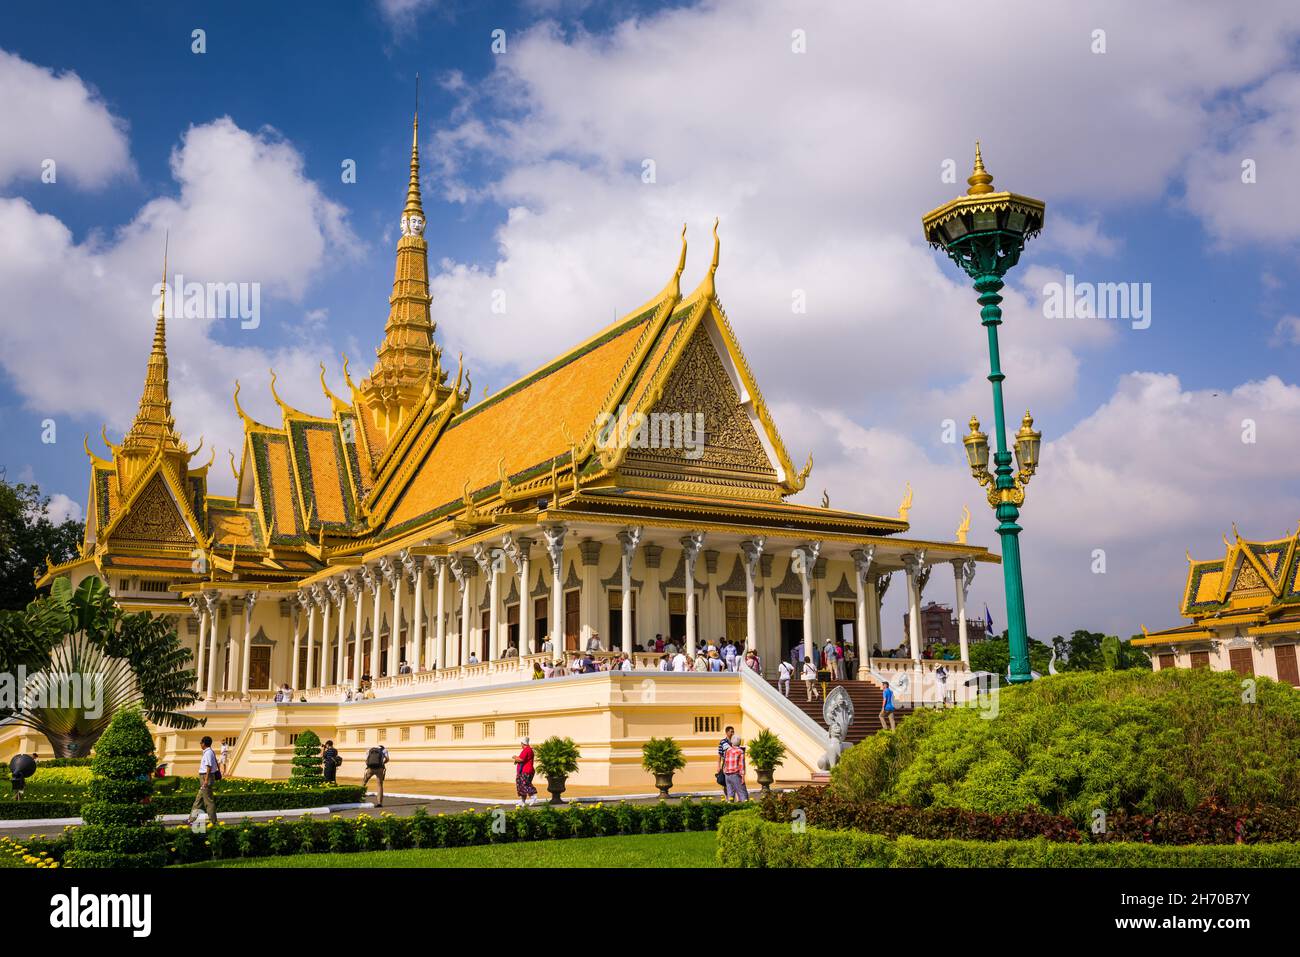 Phnom Penh, Cambodia, 17 Nov 2015: Tourists visiting the Royal Palace in the capital on a sunny day. Stock Photo